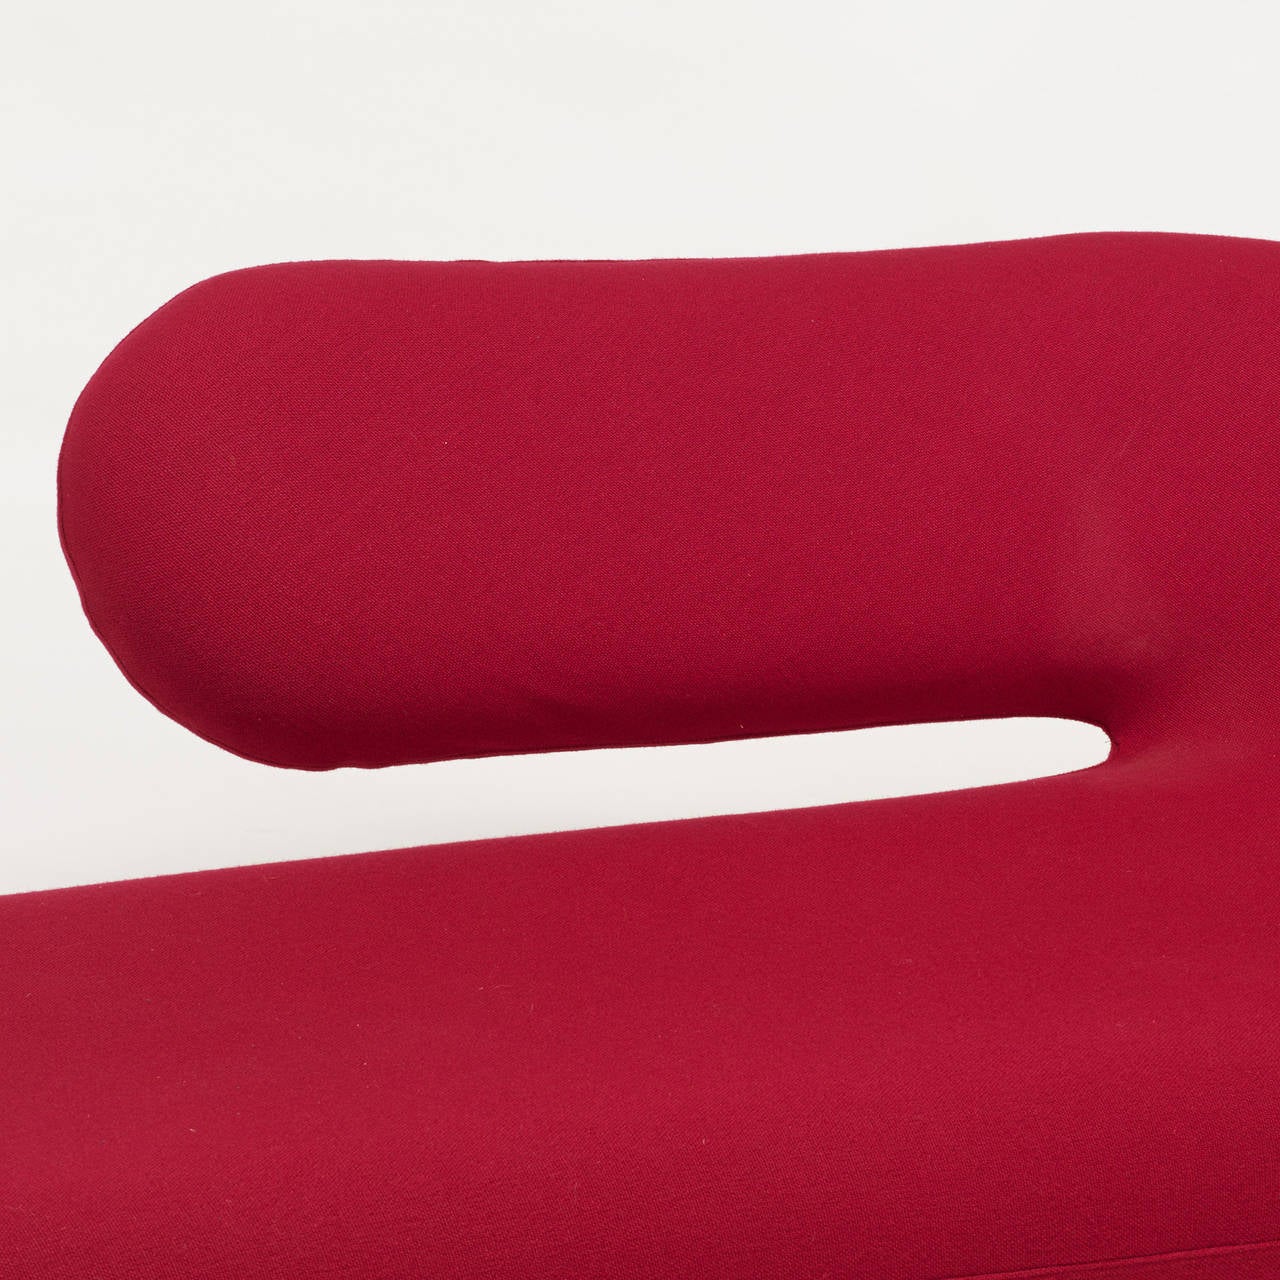 Plated Cleopatra Chaise Lounge by Geoffrey Harcourt for Artifort